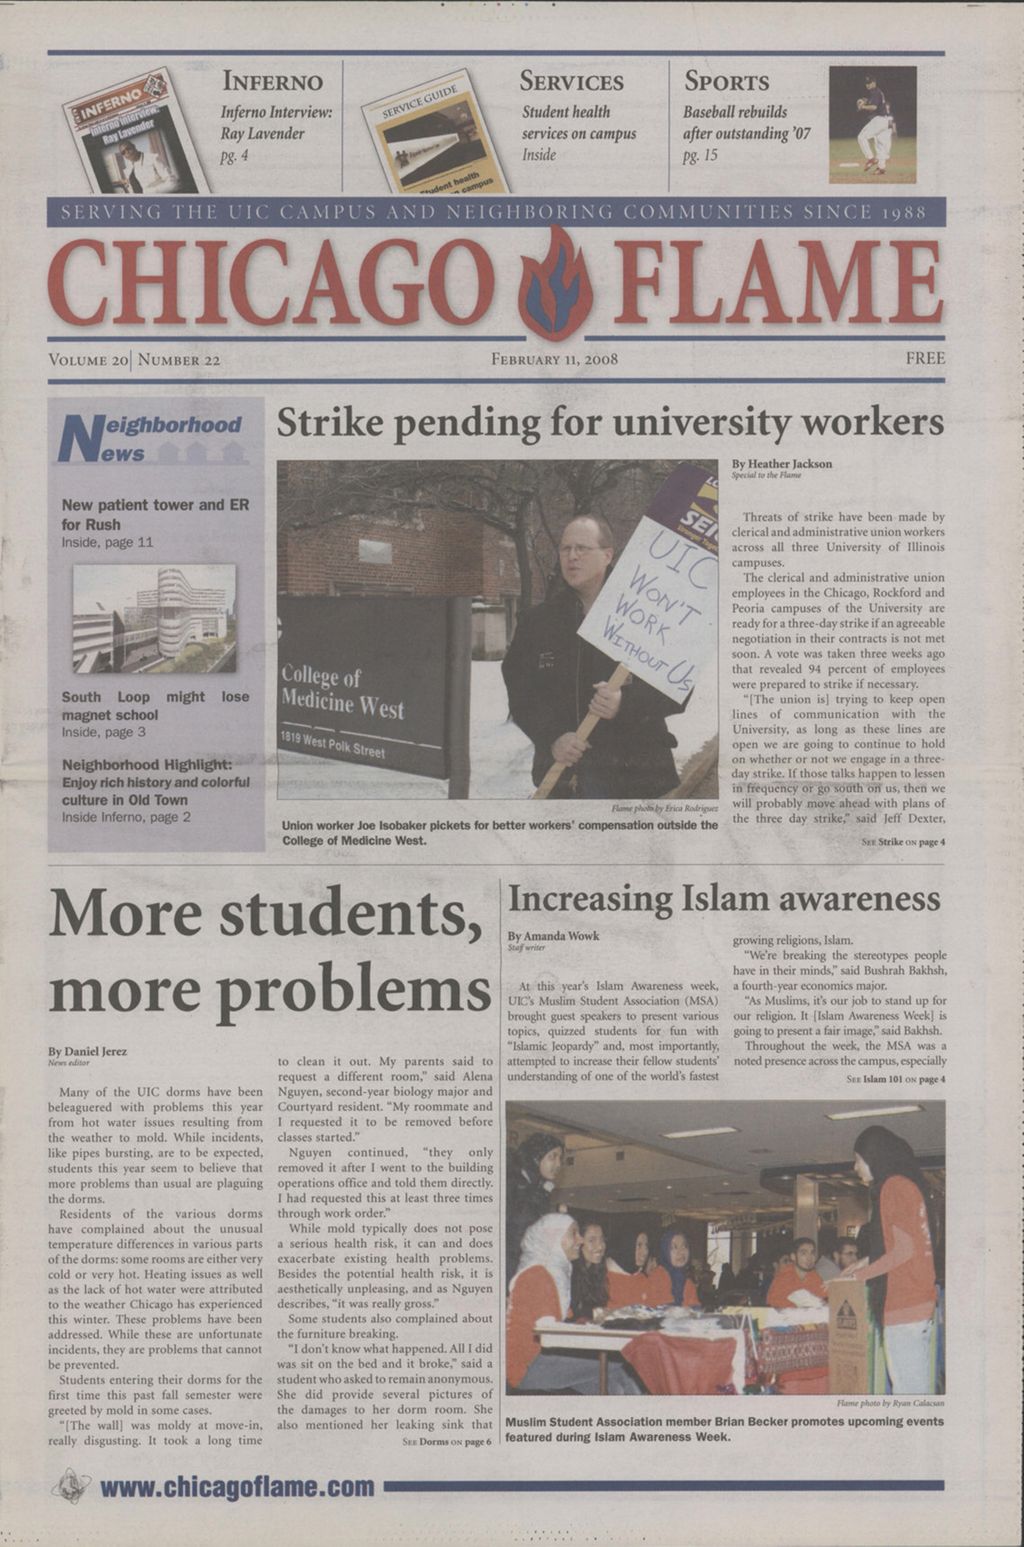 Chicago Flame (February 11, 2008)